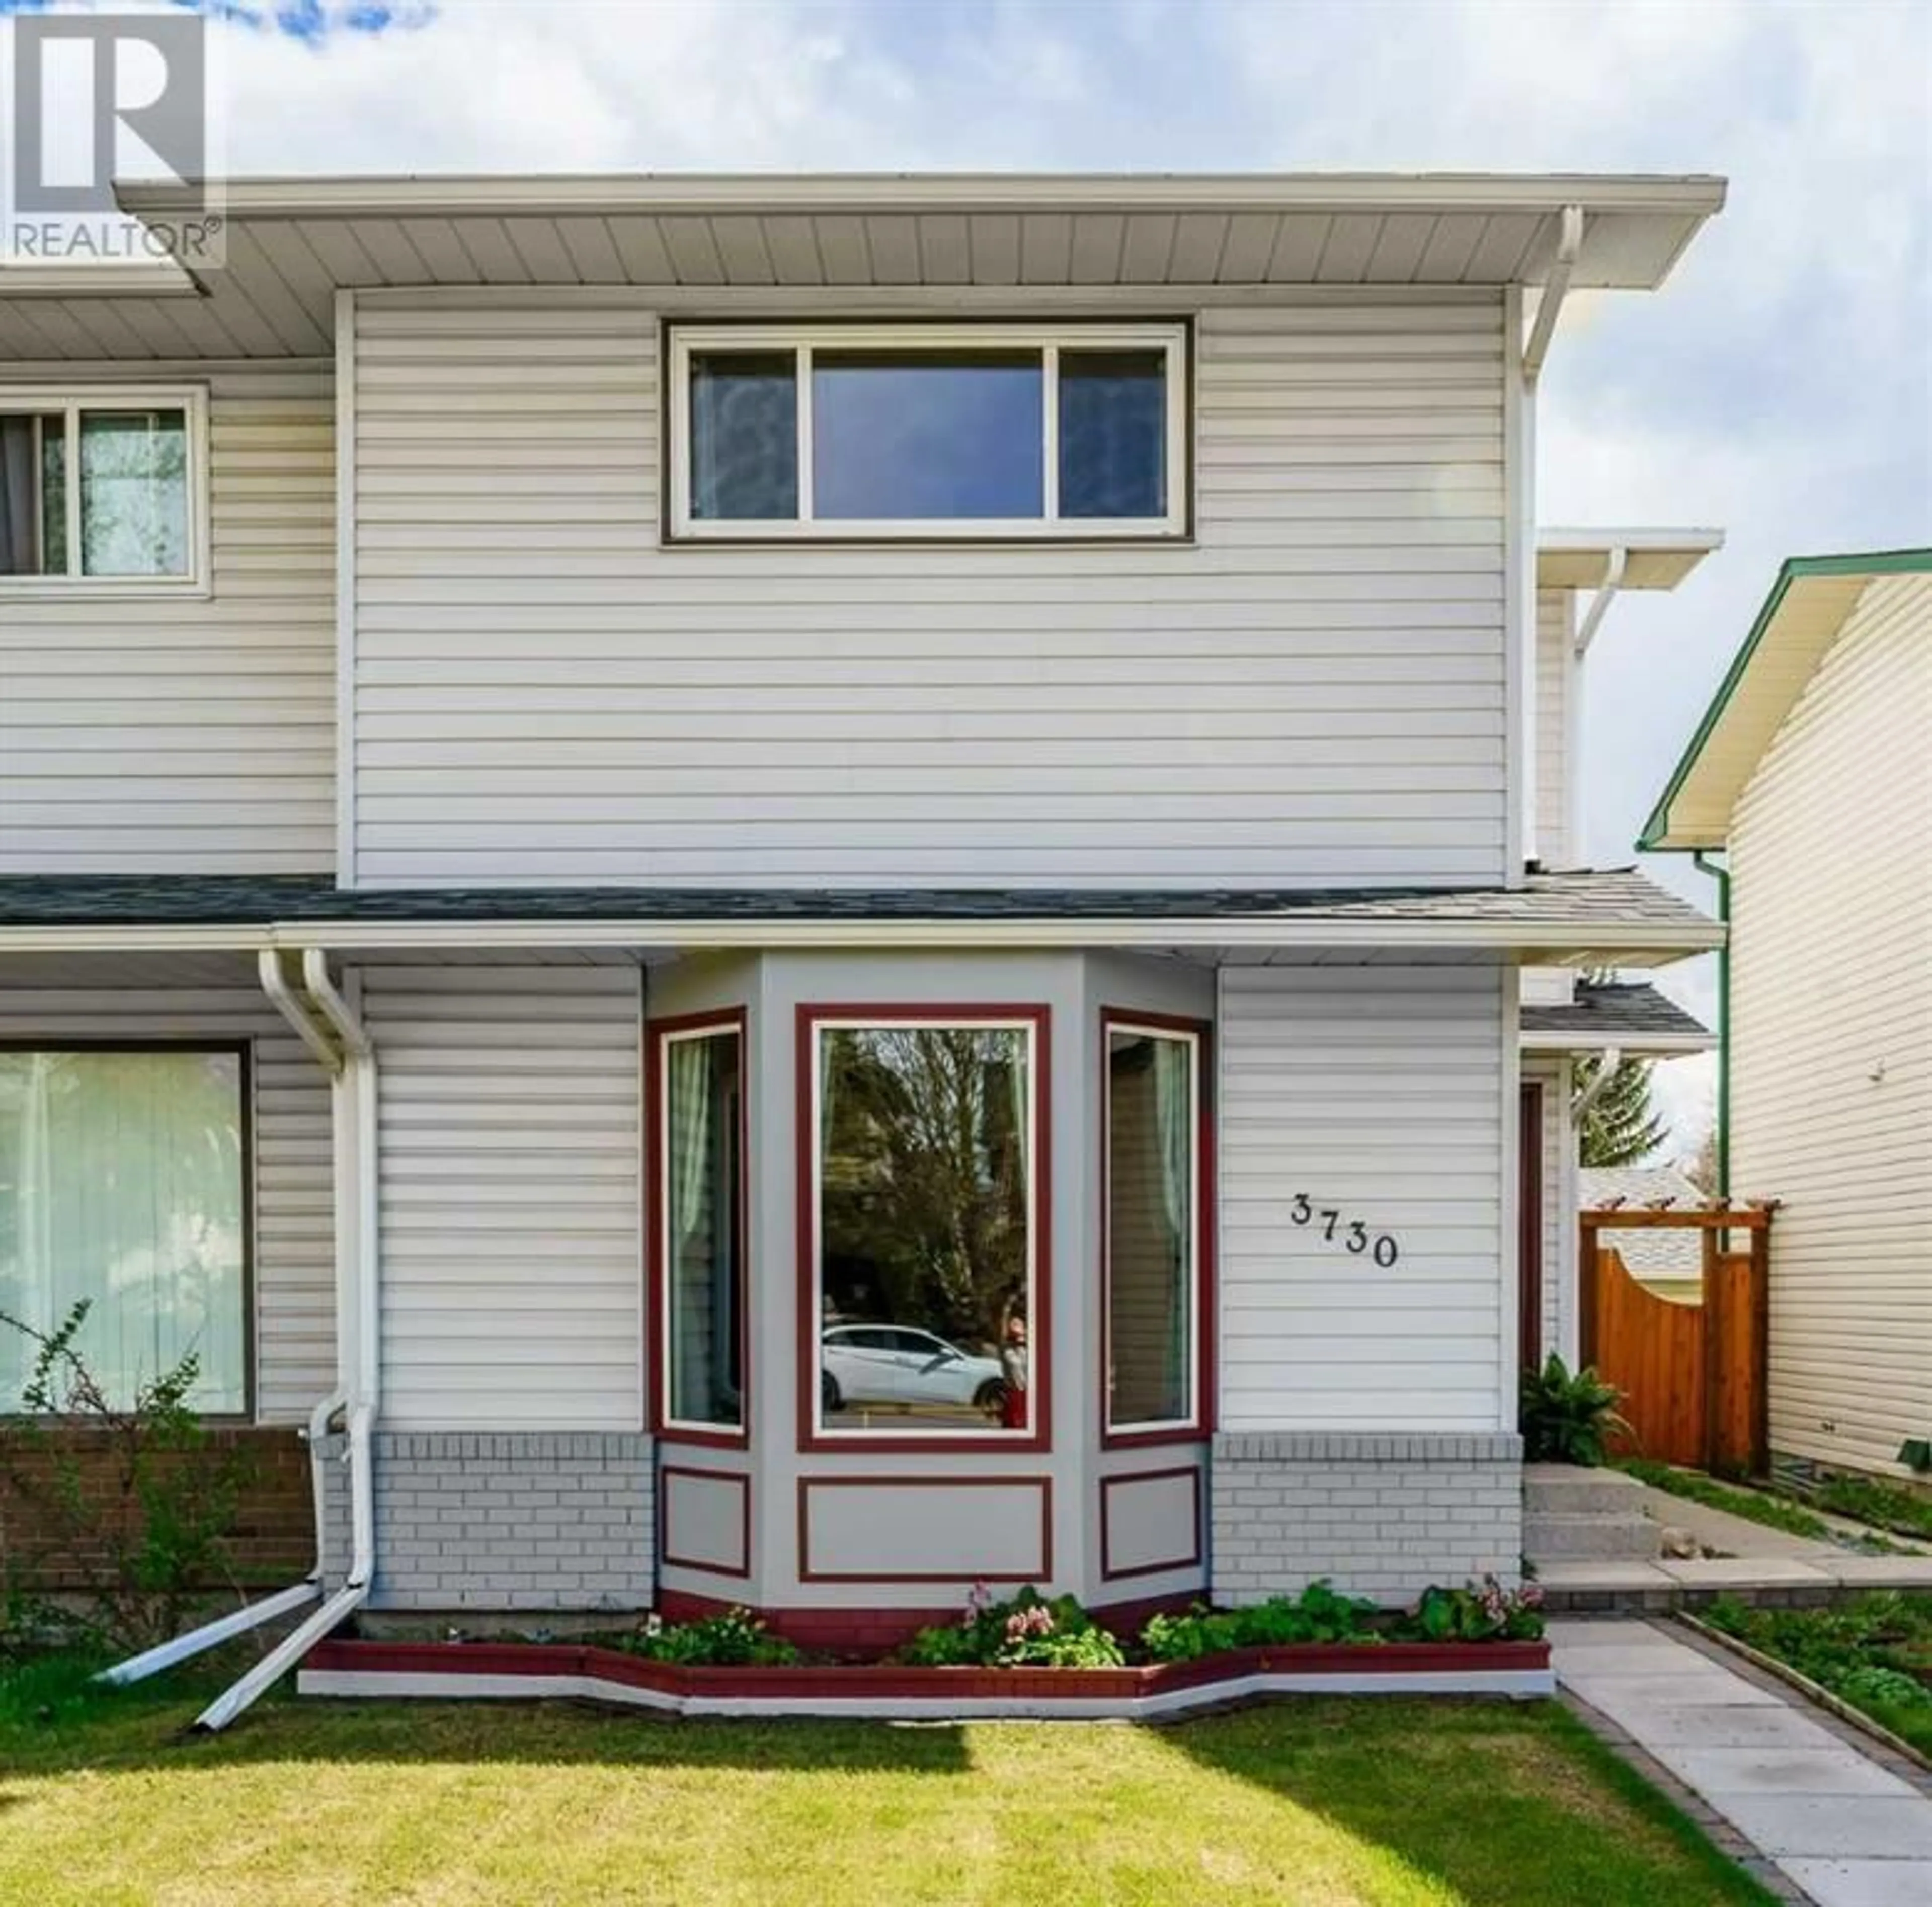 Home with vinyl exterior material for 3730 Cedarille Drive SW, Calgary Alberta T2W3Z8